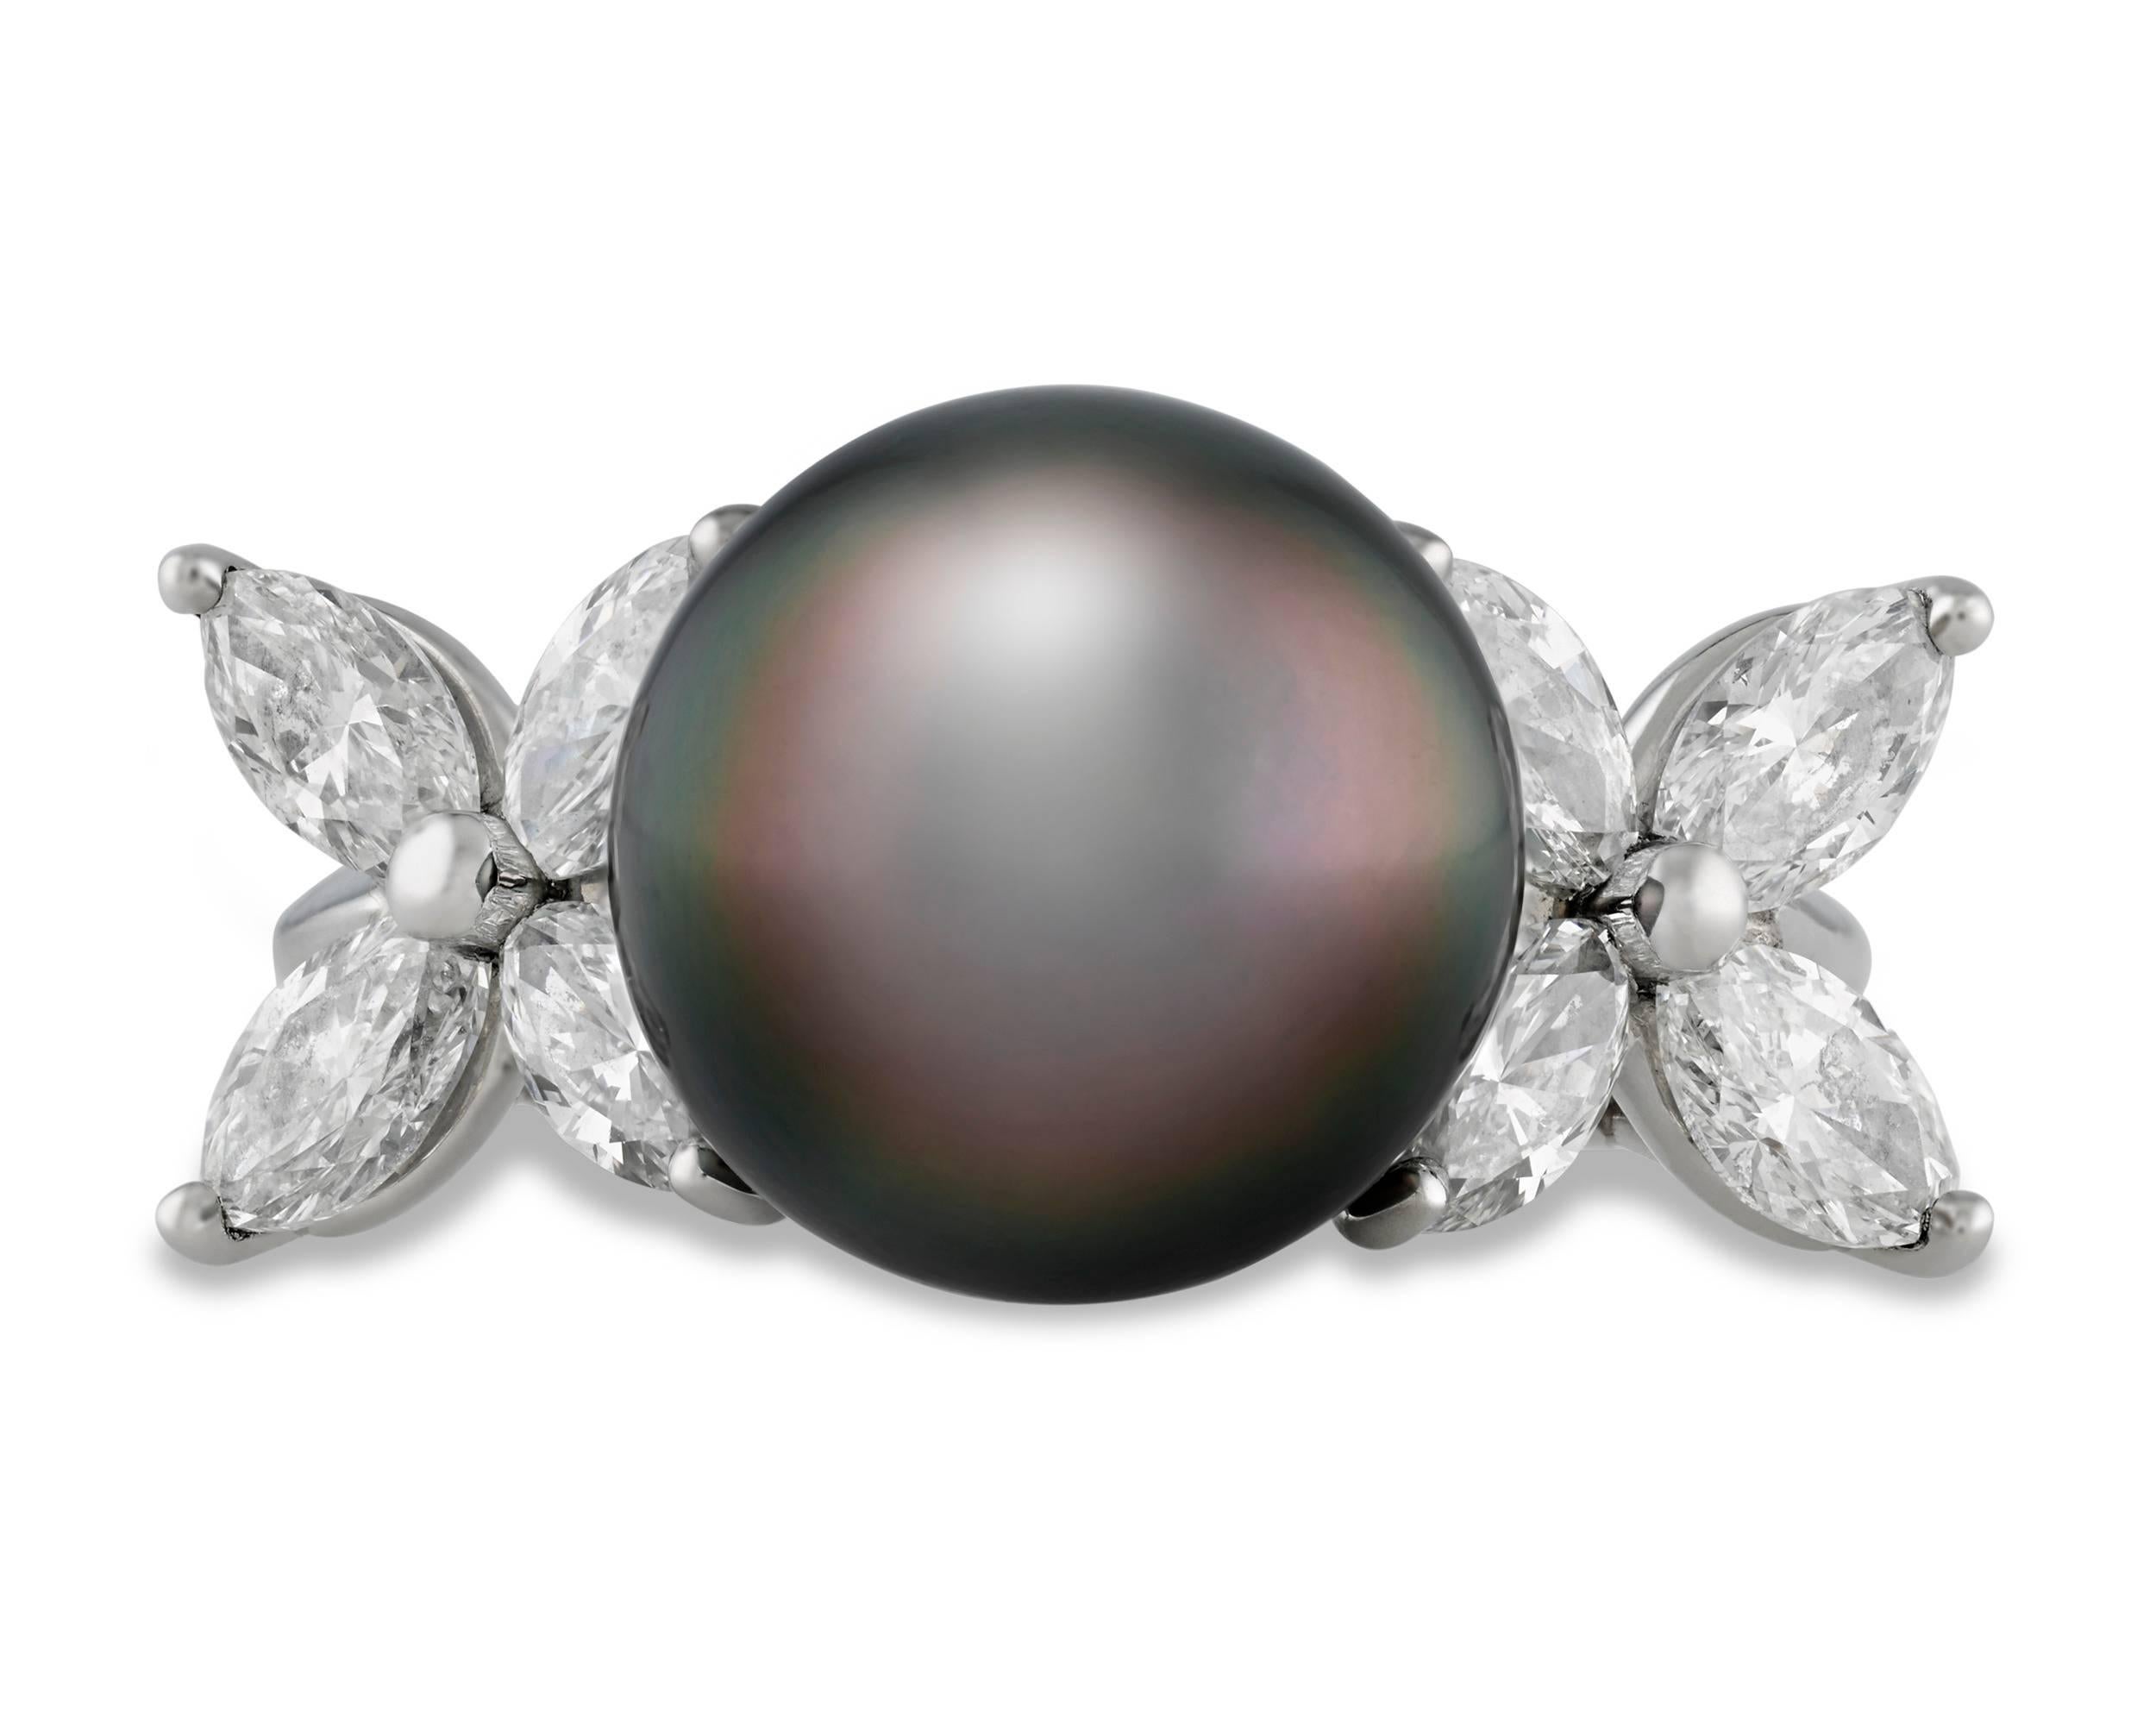 A breathtaking 11.6mm Tahitian black pearl showcases its mesmerizing beauty in this elegant Tiffany & Co. ring. Encircled by 1.59 carats of white diamonds in its dazzling platinum setting, this pearl displays the peerless depth and glow accomplished